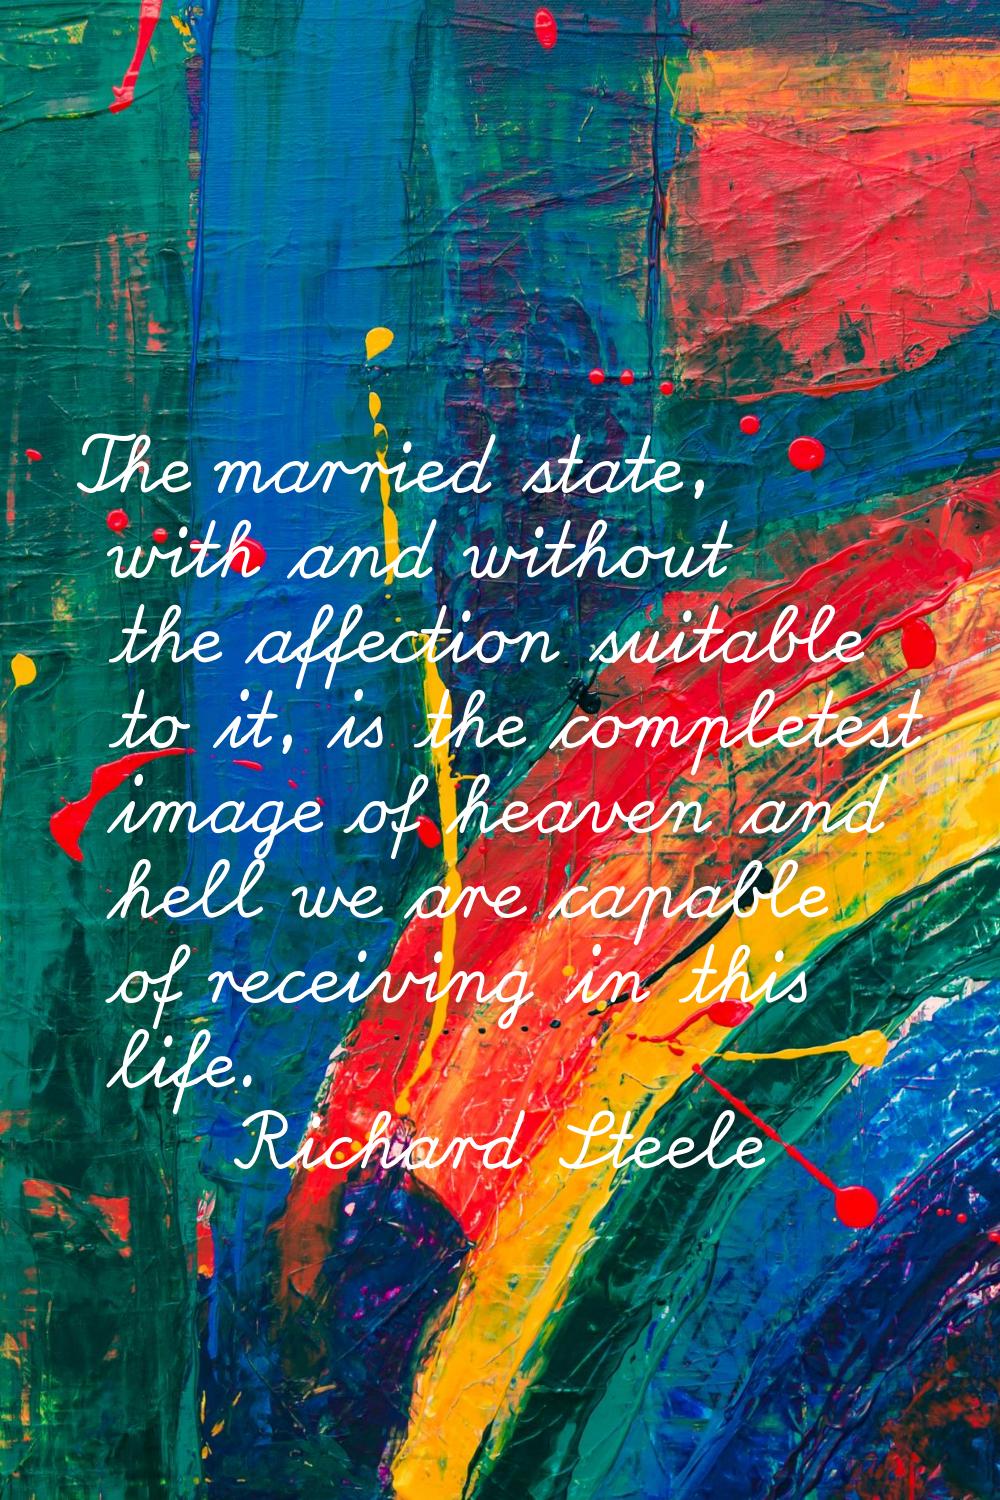 The married state, with and without the affection suitable to it, is the completest image of heaven